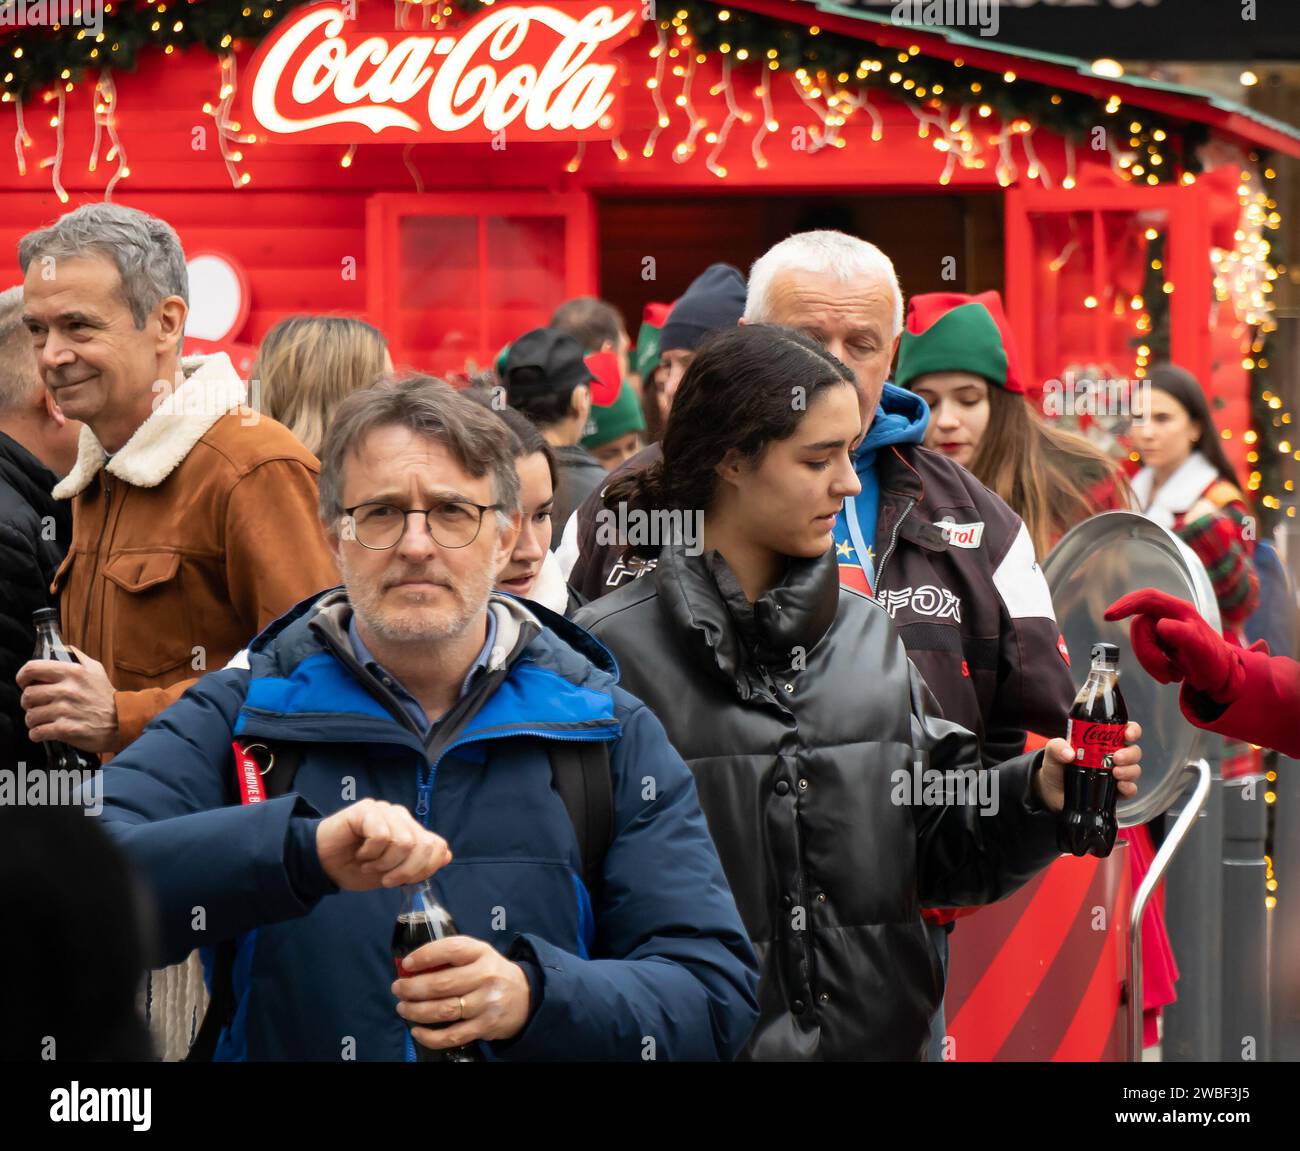 Belgrade, Serbia - January 5, 2024: Coca Cola promotion campaign on city street during Christmas holiday market, giving away free drinks to people Stock Photo